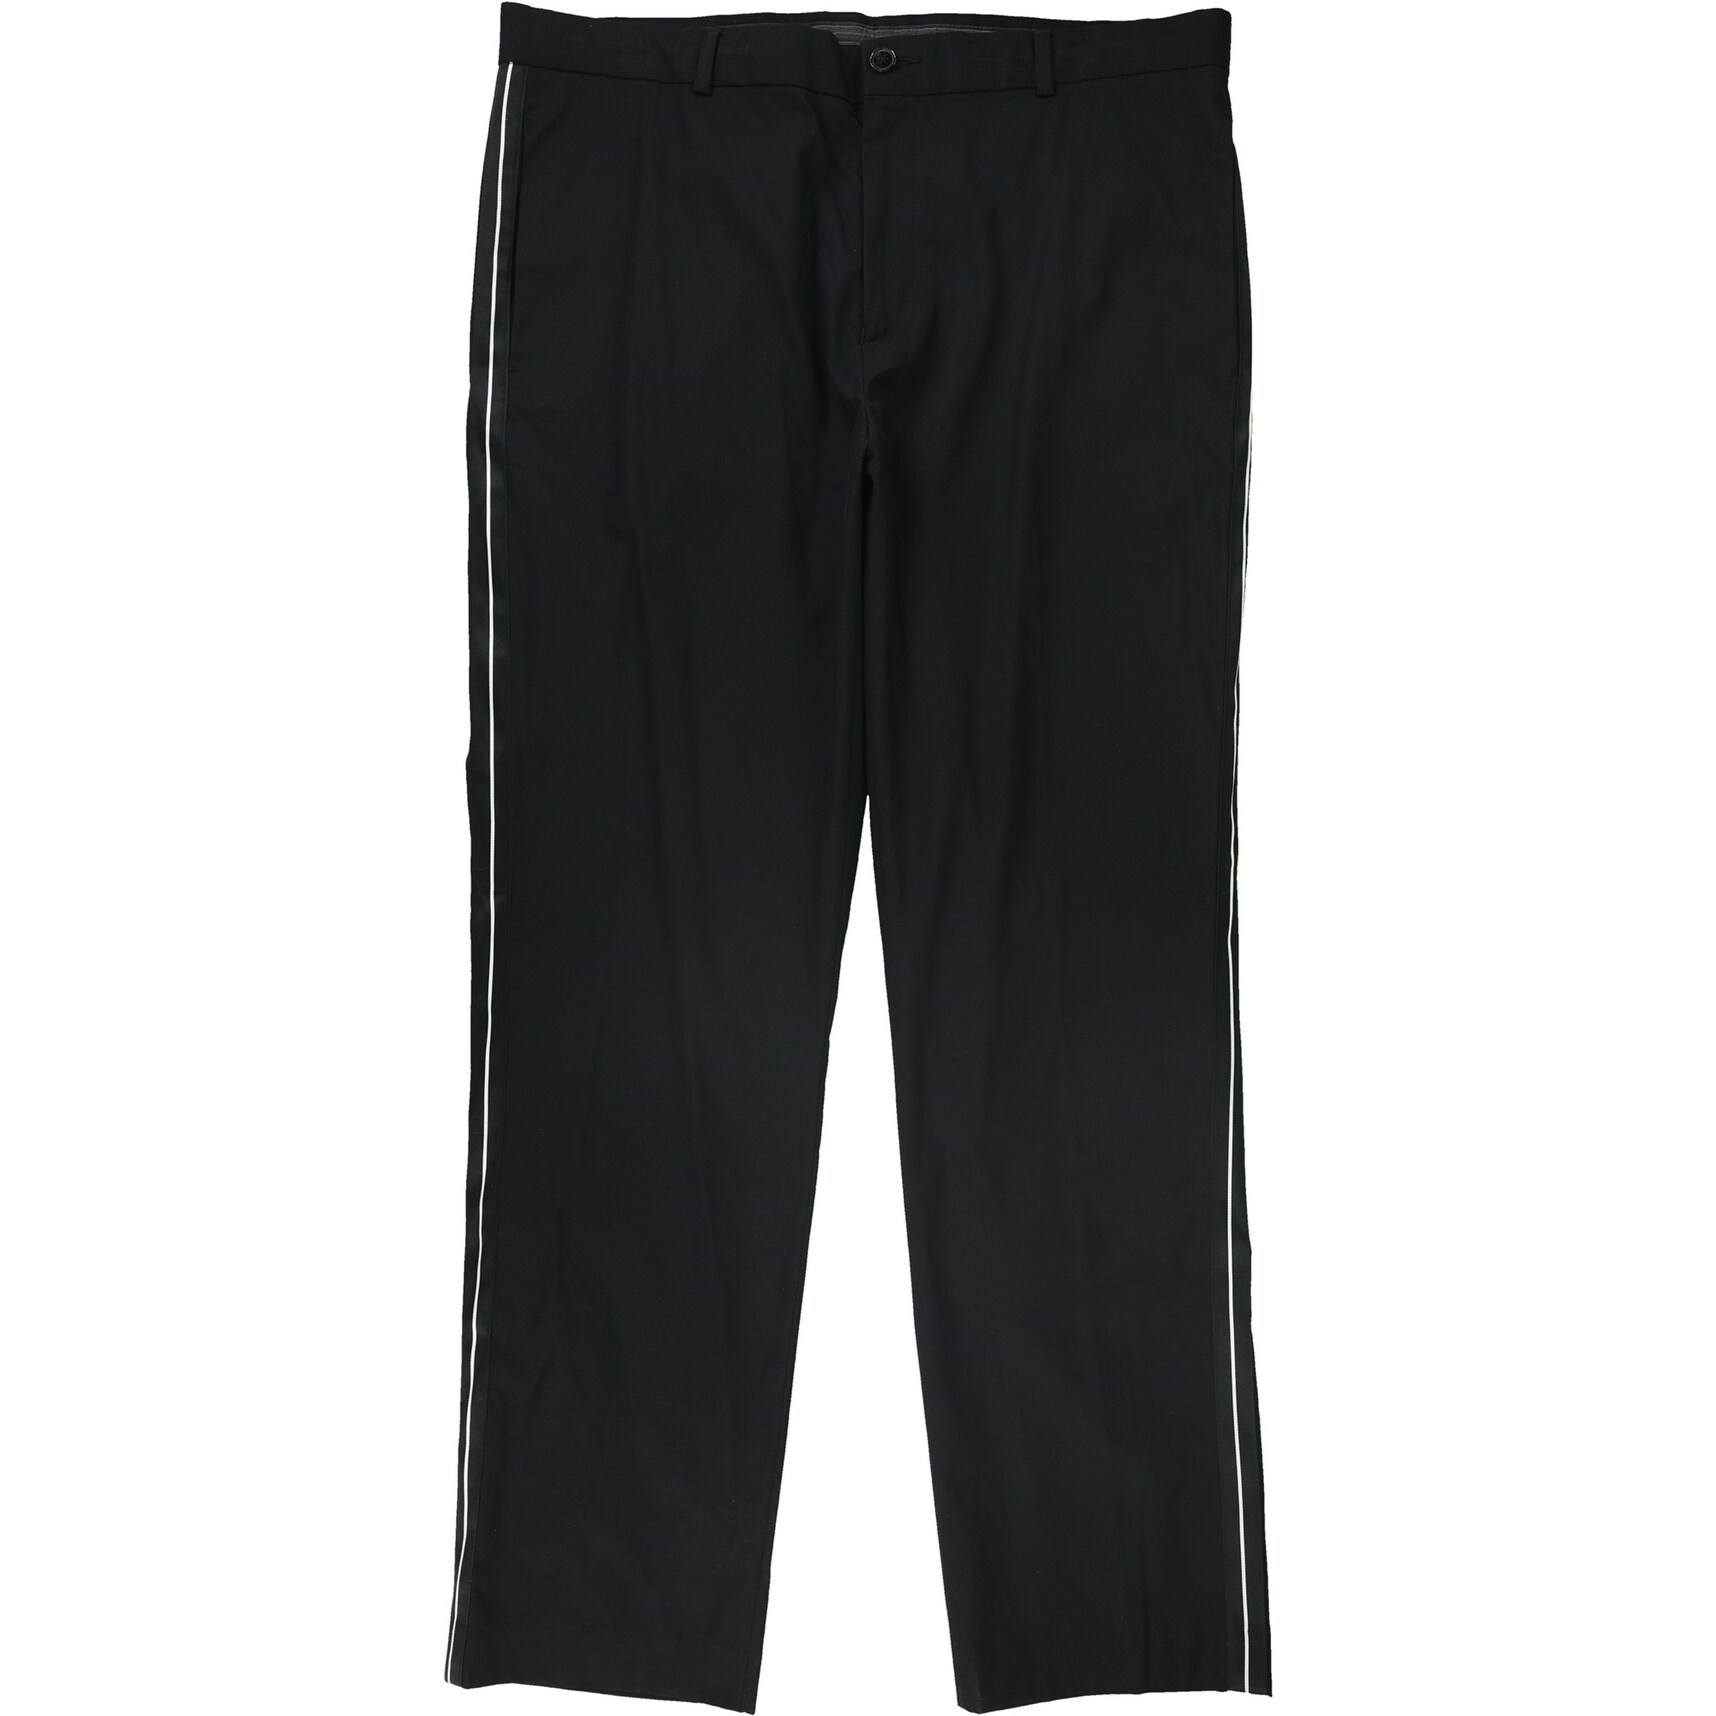 mens grey trousers with black stripe